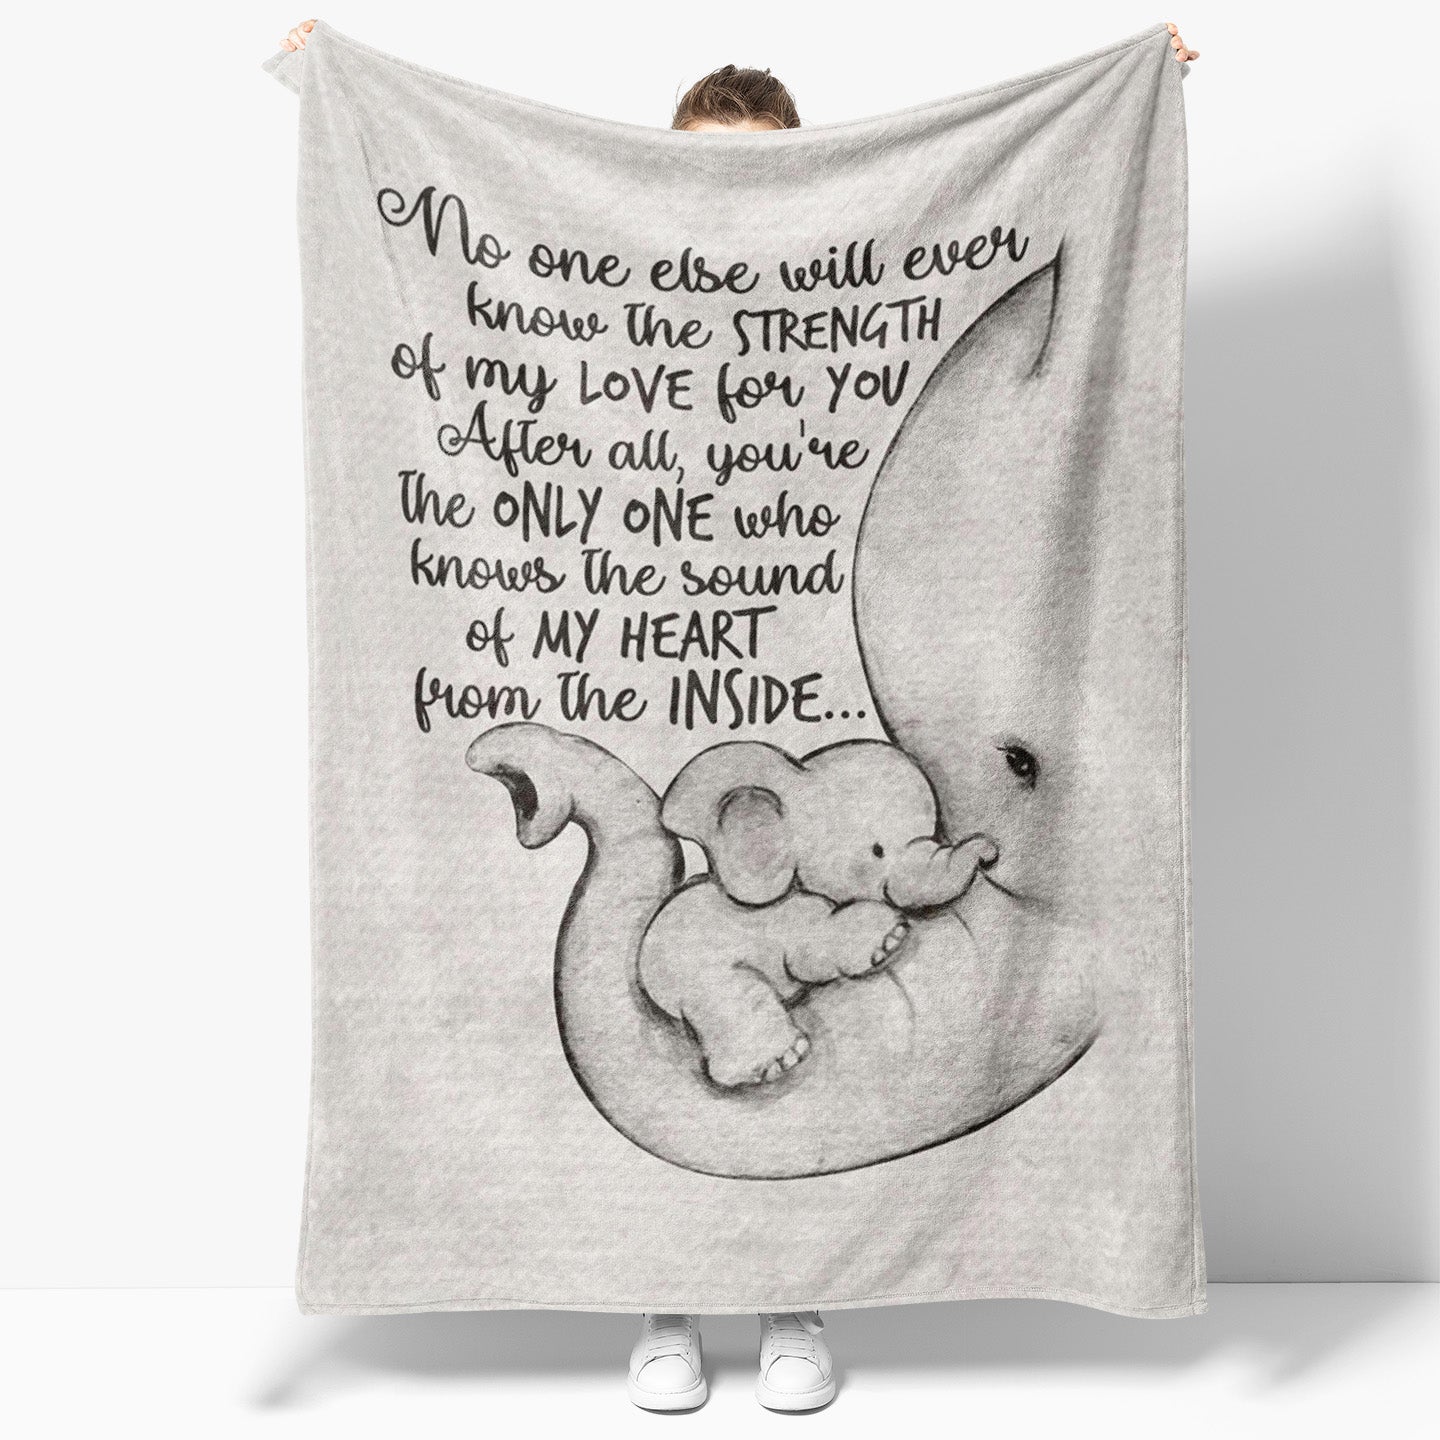 Blanket Gift Ideas For Mom, Thoughtful First Mothers Day Gifts Ideas, Baby  Elephant, Gift Ideas For Expecting Mothers, Unique Gift Idea For Mom To Be  - Sweet Family Gift